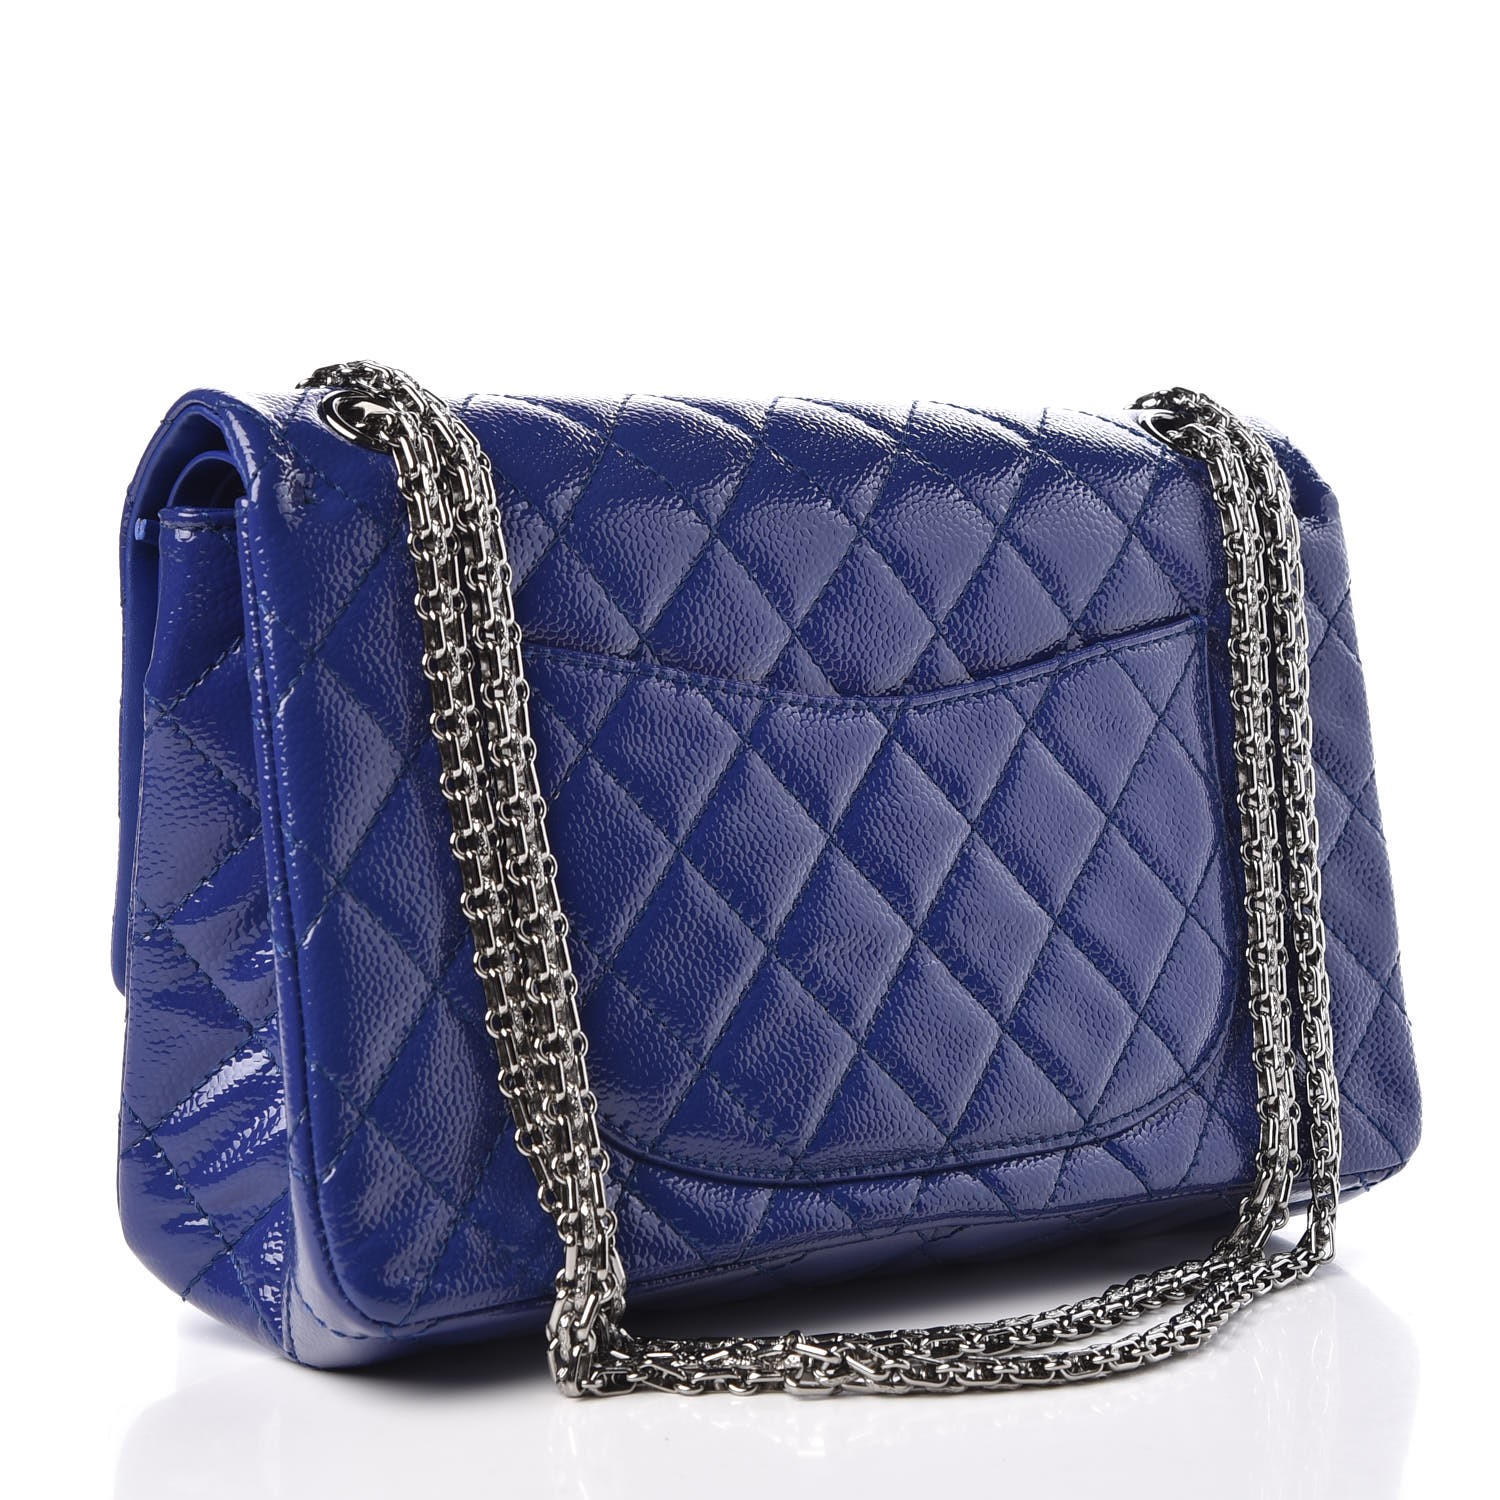 CHANEL Patent Caviar Quilted 2.55 Reissue 226 Flap Blue 323187